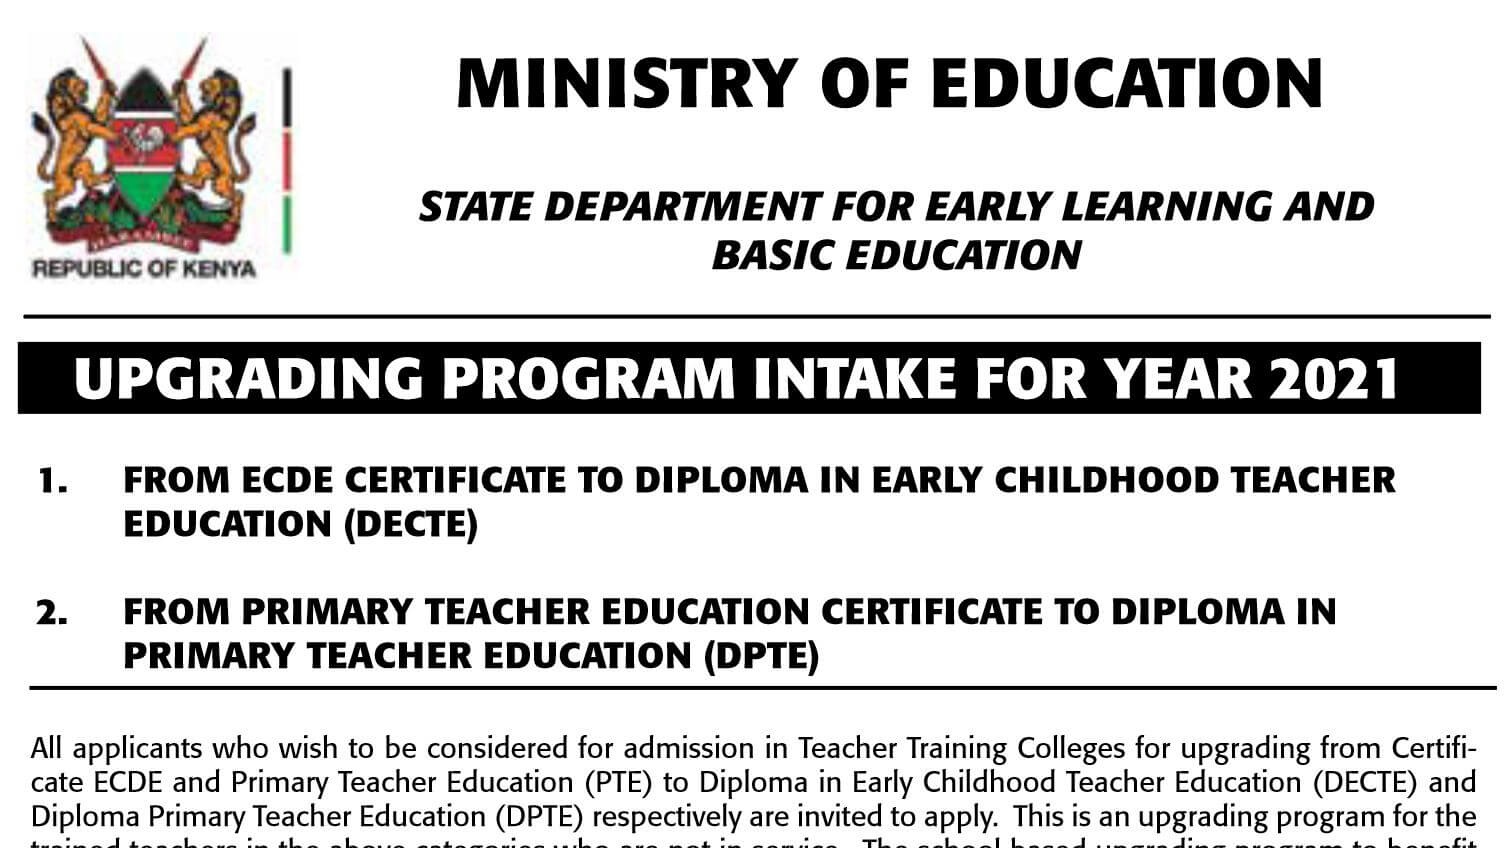 Ministry of education upgrading program now open for application